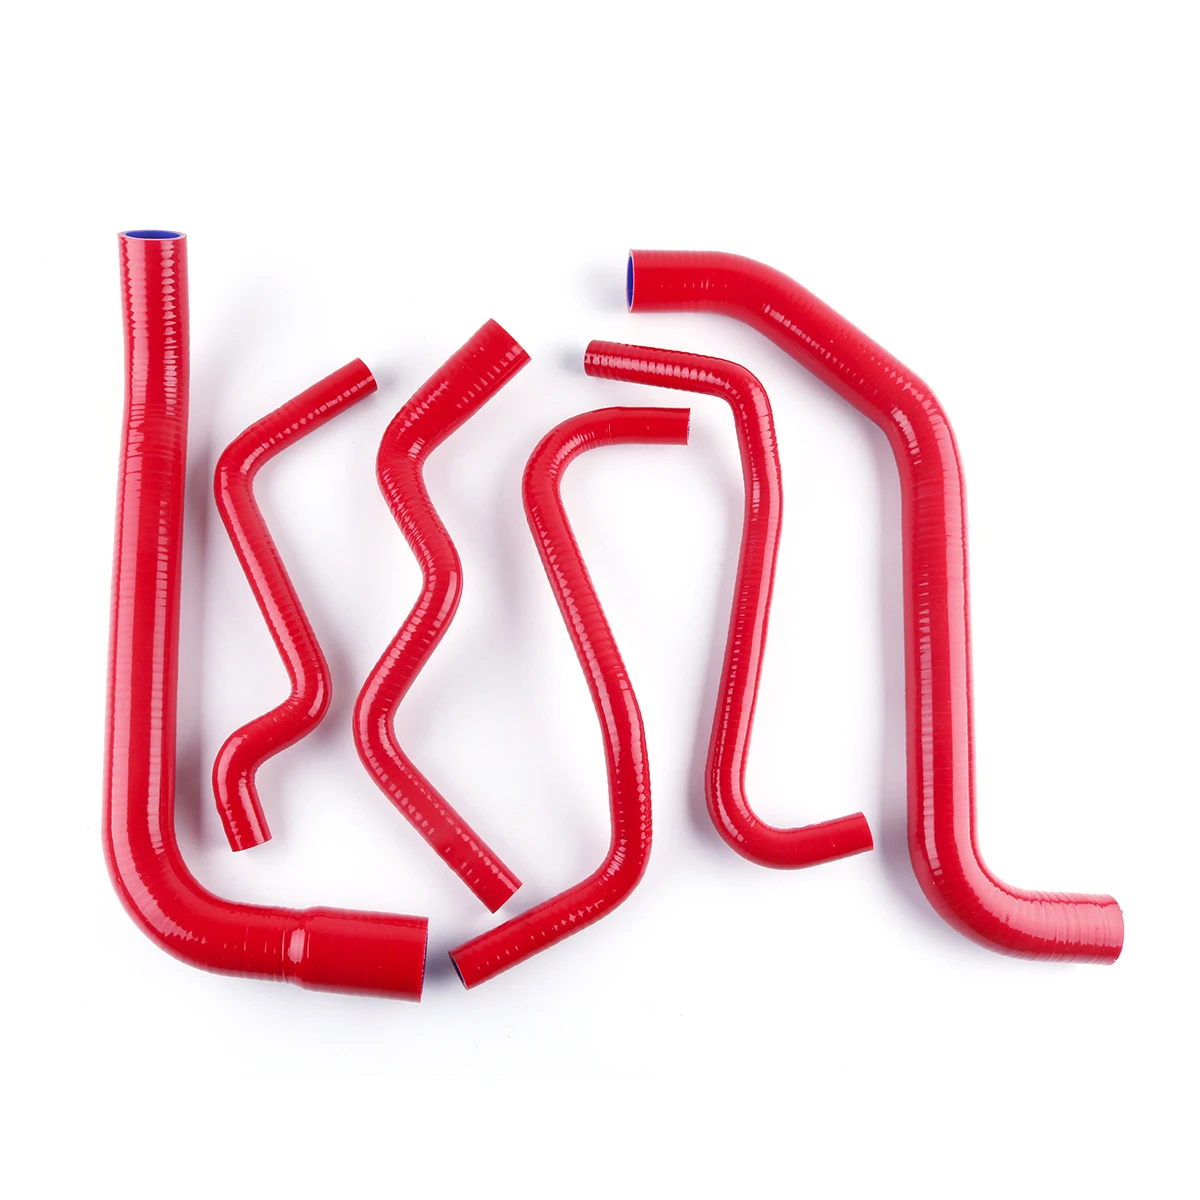 

FOR Holden Commmodore V6 VT & VX 3.8L 1997-2002 Silicone Radiator Coolant Hose 10 COLORS 6 PCS